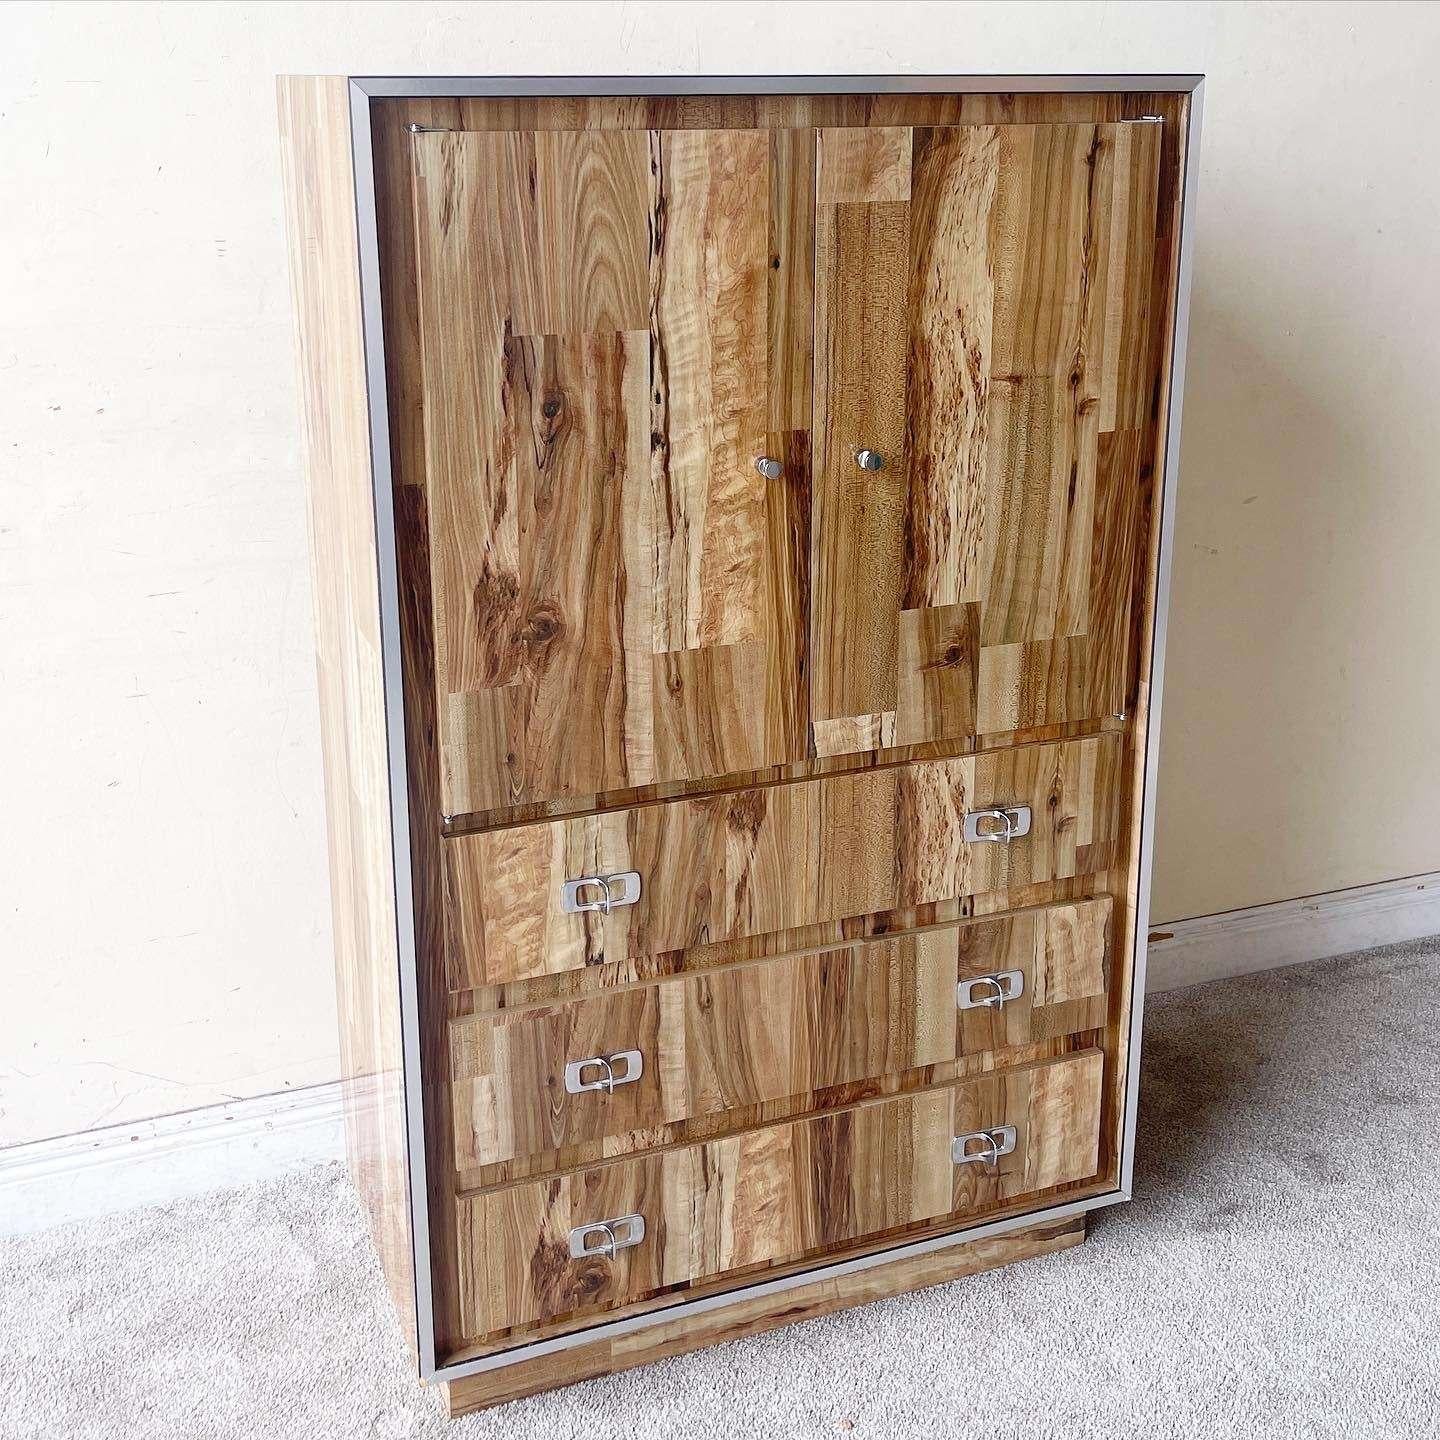 Incredible vintage postmodern armoire with three spacious drawers. Features a Woodgrain glossy laminate with a silver edge and chrome handles.

